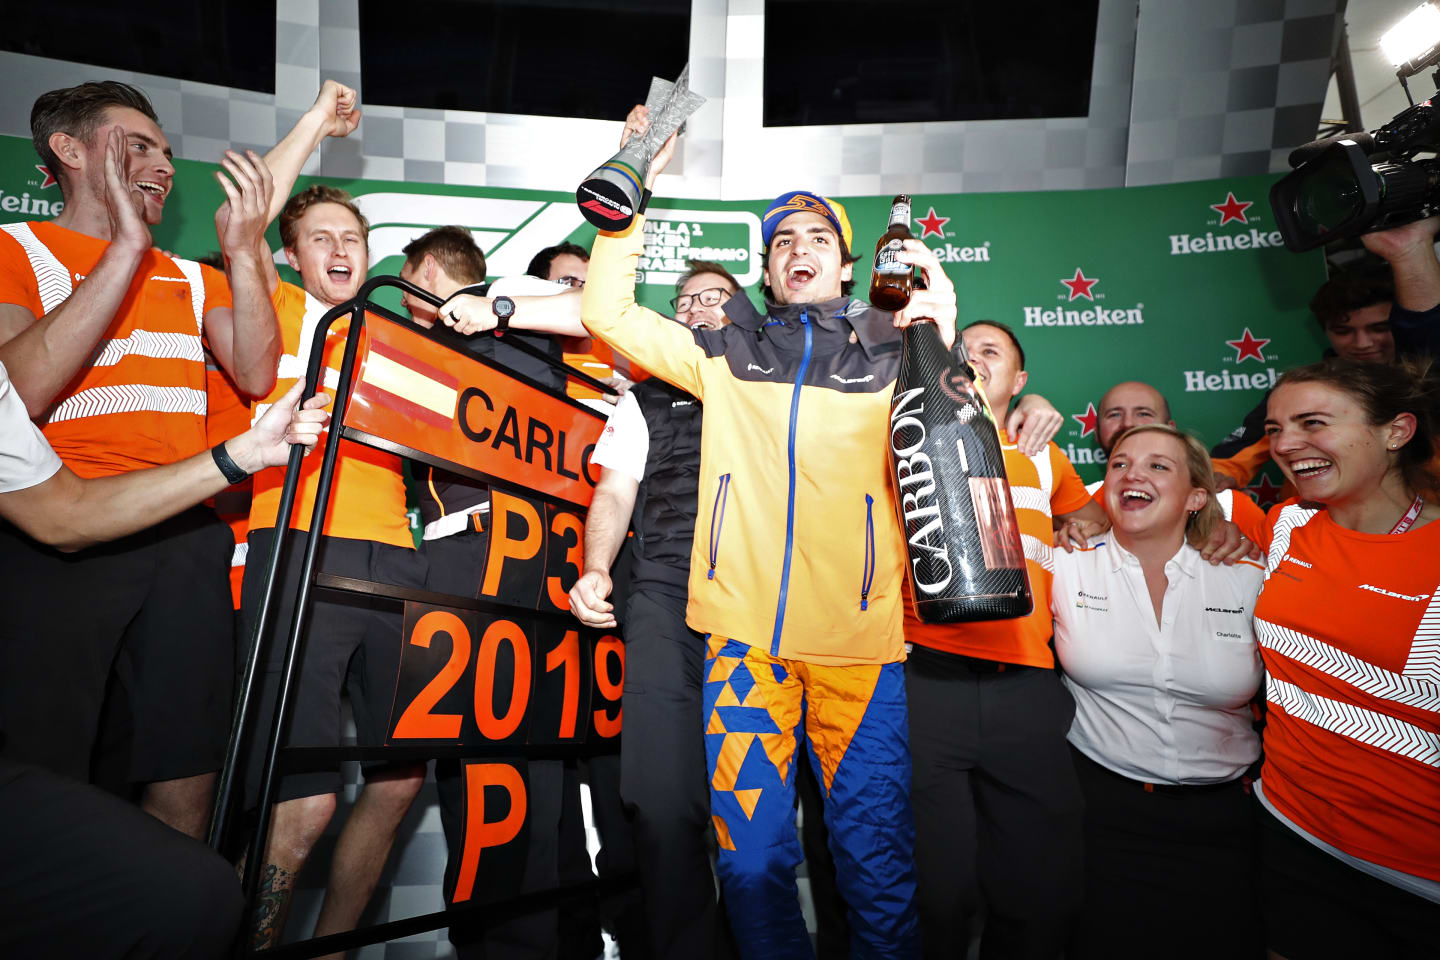 SAO PAULO, BRAZIL - NOVEMBER 17: Carlos Sainz of Spain and McLaren F1 celebrates after later being awarded third place in the F1 Grand Prix of Brazil at Autodromo Jose Carlos Pace on November 17, 2019 in Sao Paulo, Brazil. (Photo by Getty Images/Getty Images)